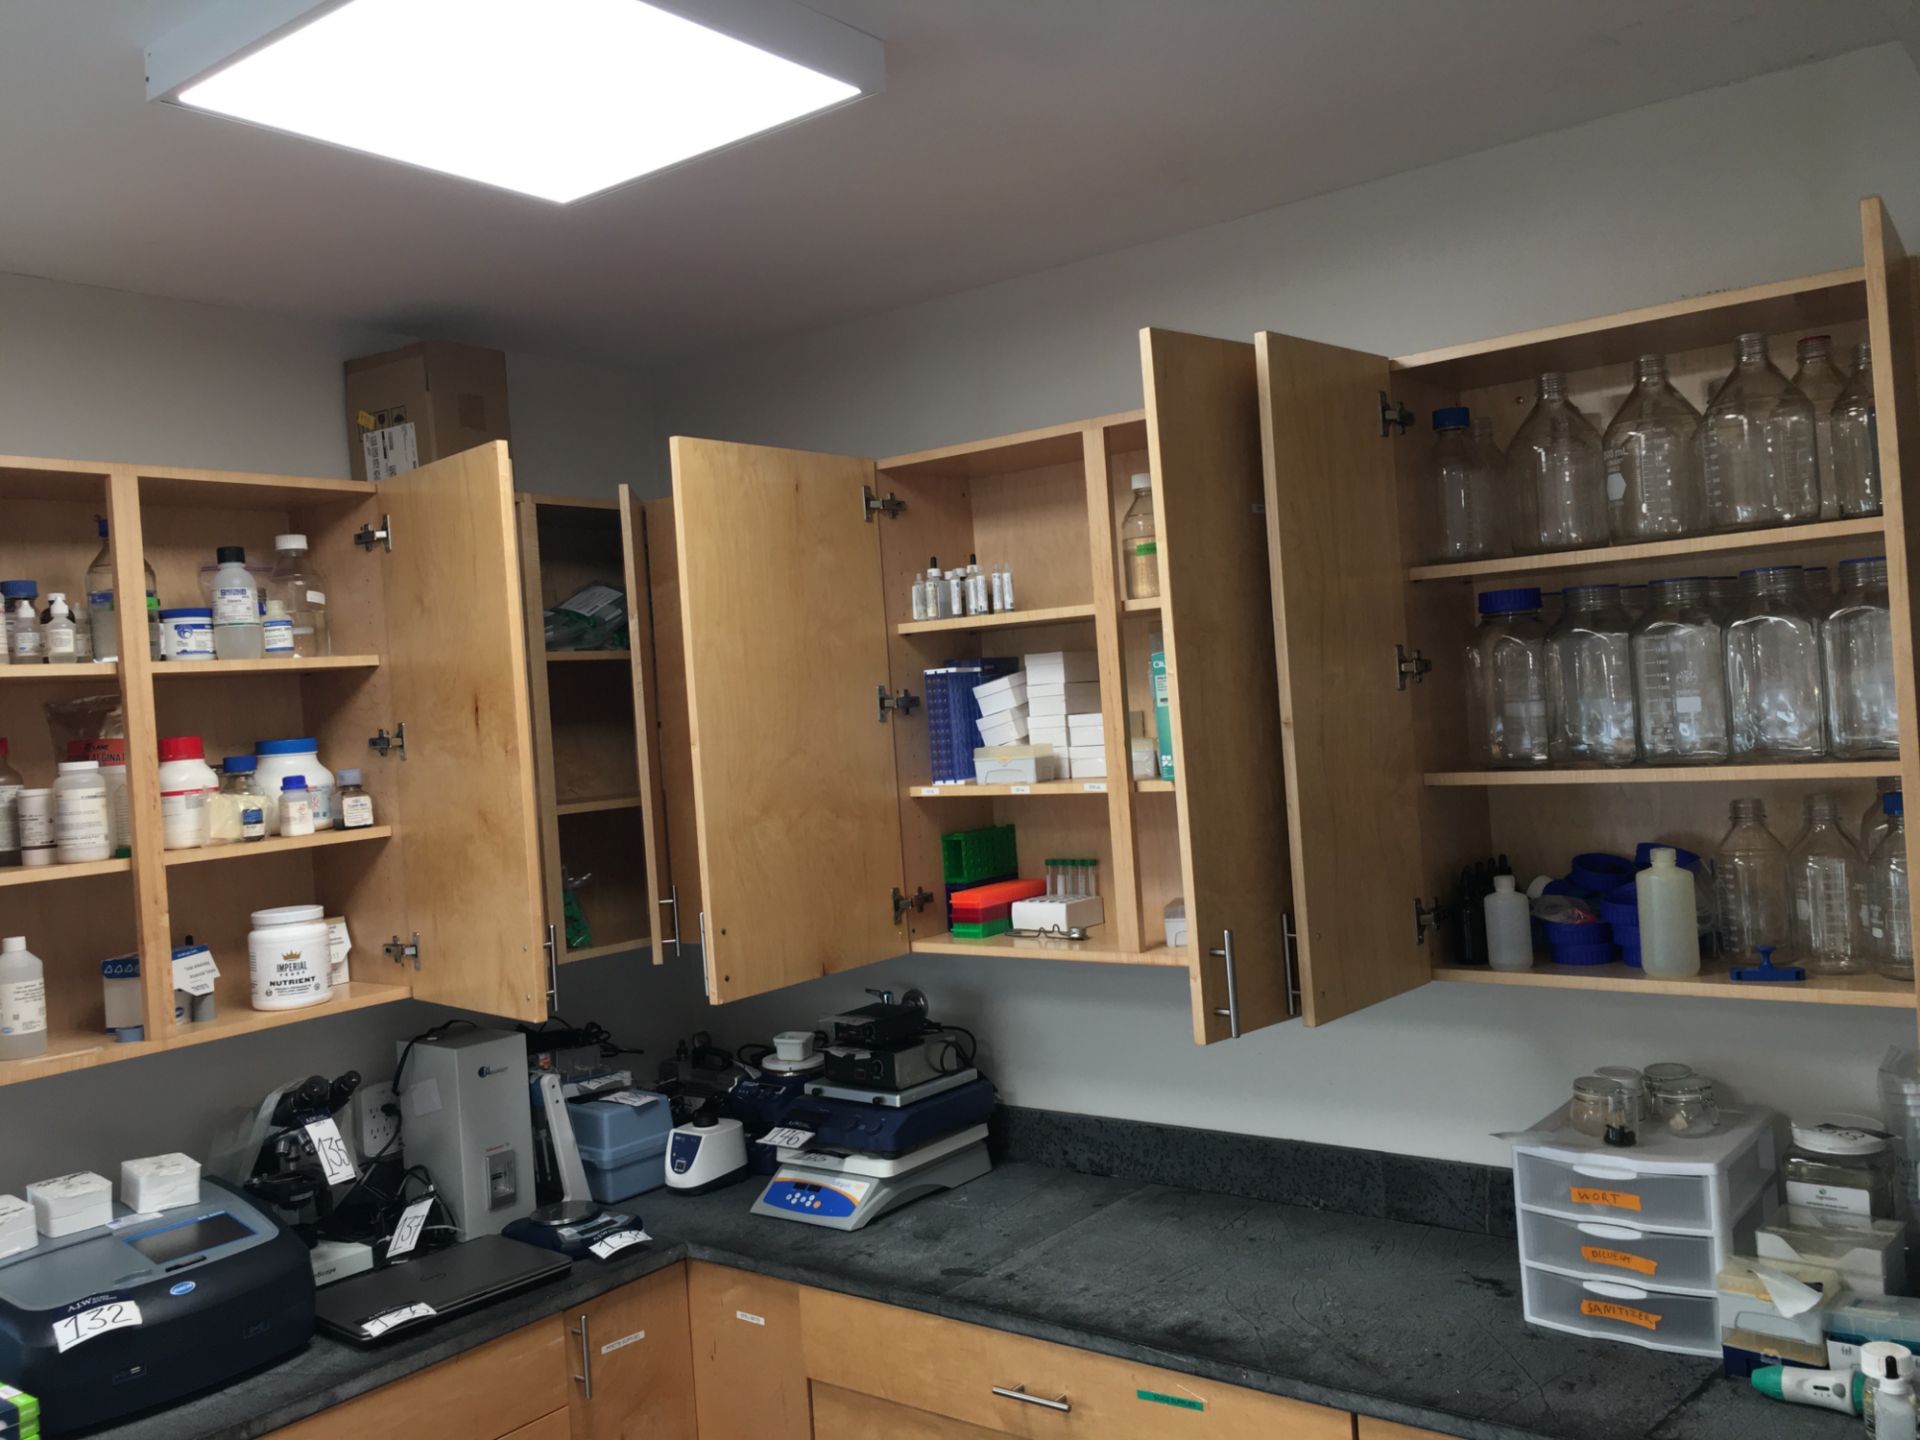 A group of Ass't Lab Supplies in UPPER Cabinets